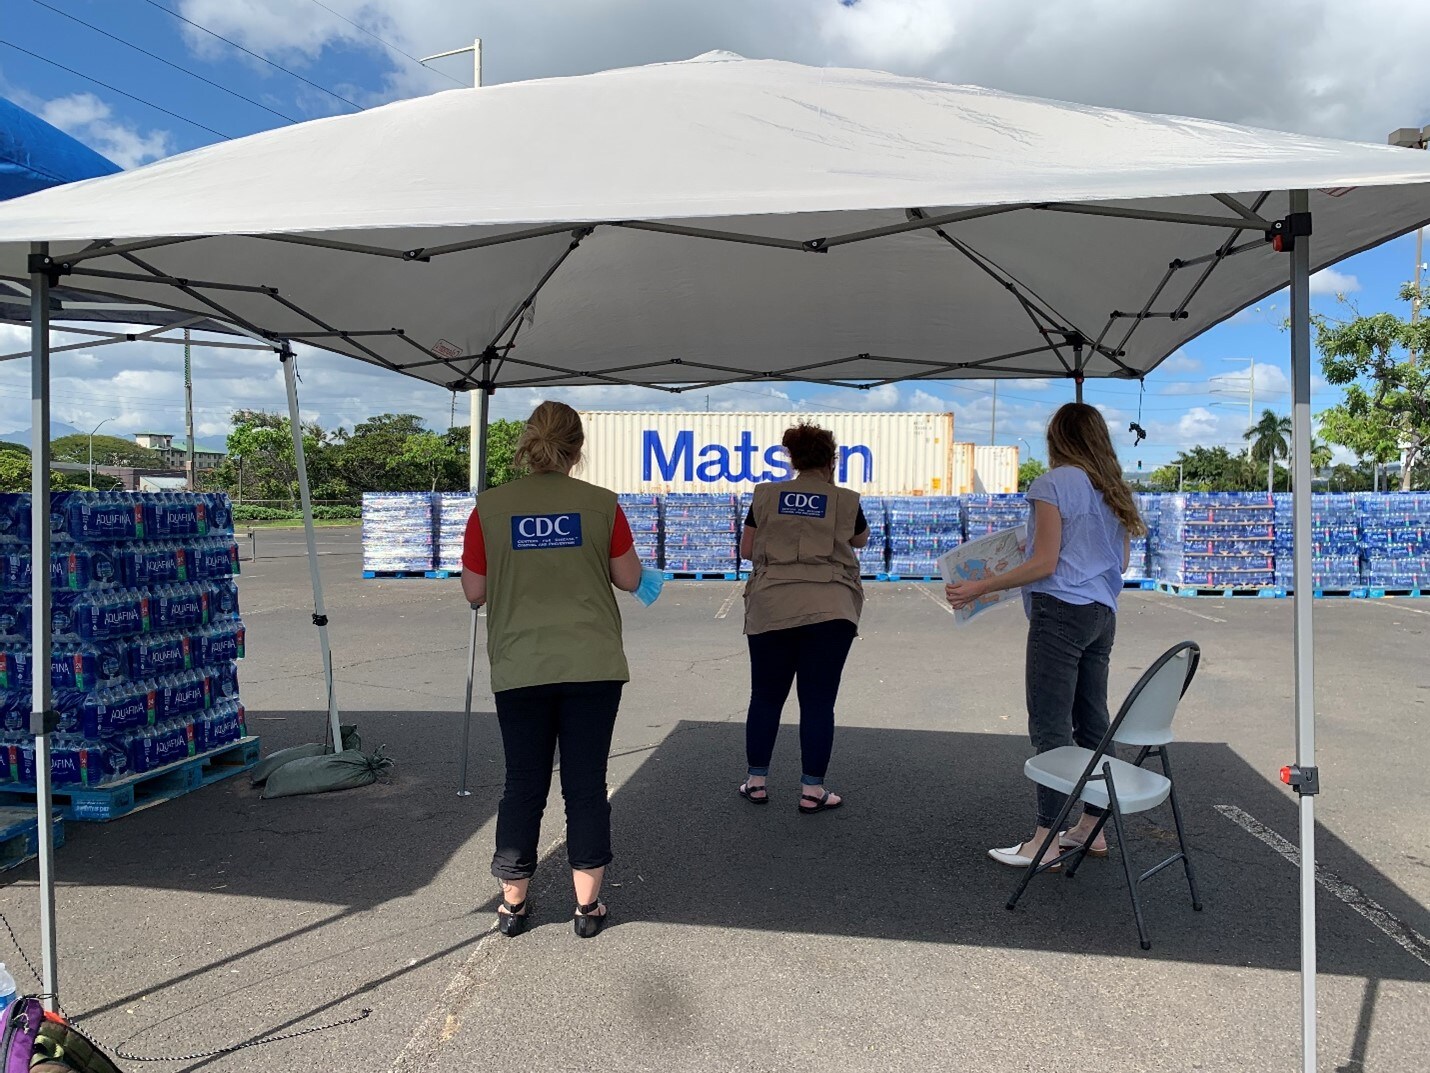 EIS officers Alyson Cavanaugh and Michele Bolduc hand out flyers at a clean water distribution site to recruit participation in a survey to understand health impacts following an event that resulted in jet fuel contamination of the drinking water on Oahu, Hawaii in January 2022.